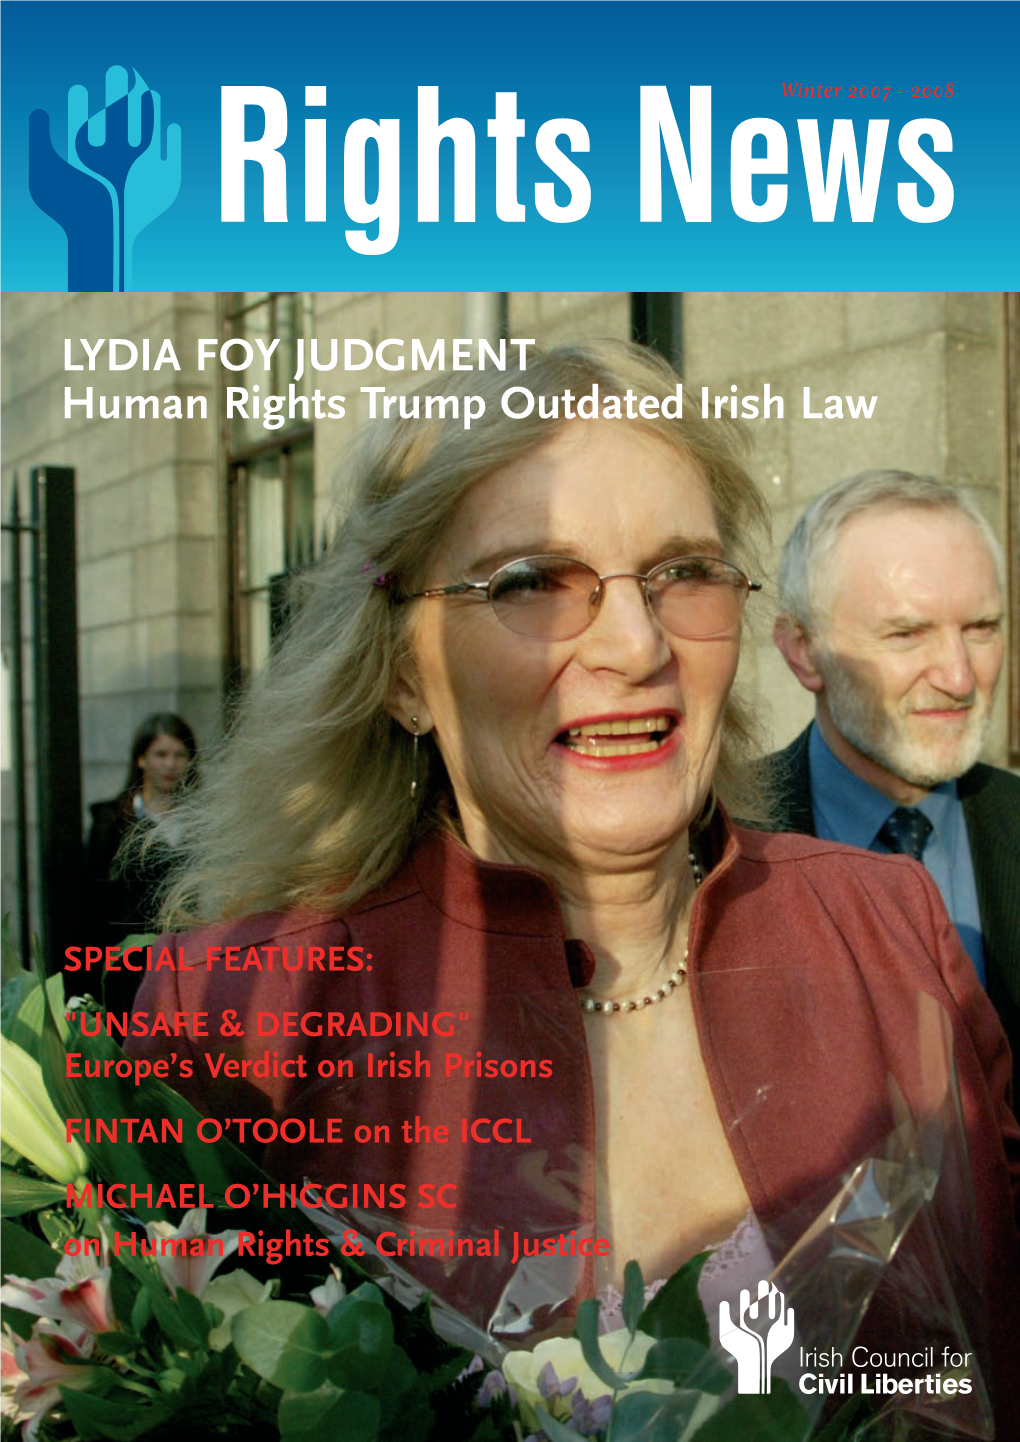 LYDIA FOY JUDGMENT Human Rights Trump Outdated Irish Law